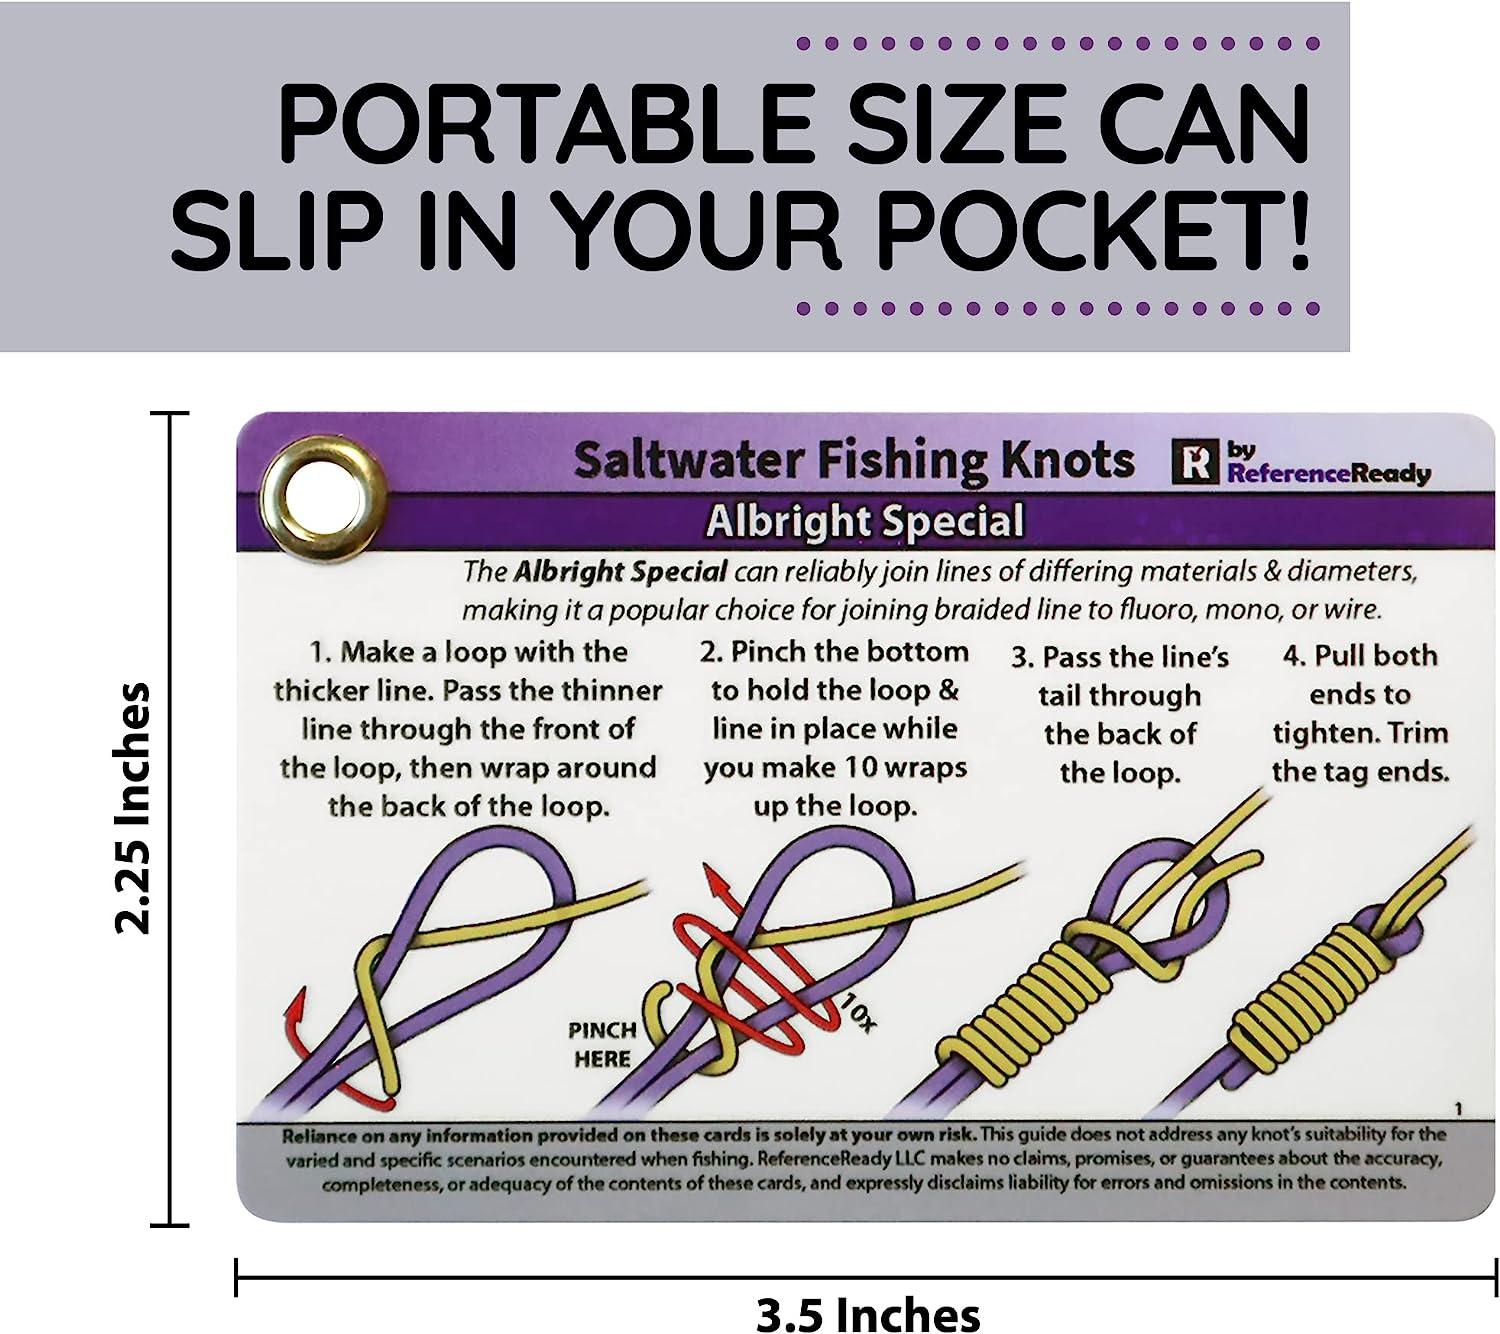 Fishing Gear Knot Tying Tool  Cover Fishing Hooks While Tying Strong  Fishing Knots, Stocking Stuffers Gifts for Men, Great Fishing Accessories  for Beginner Anglers 